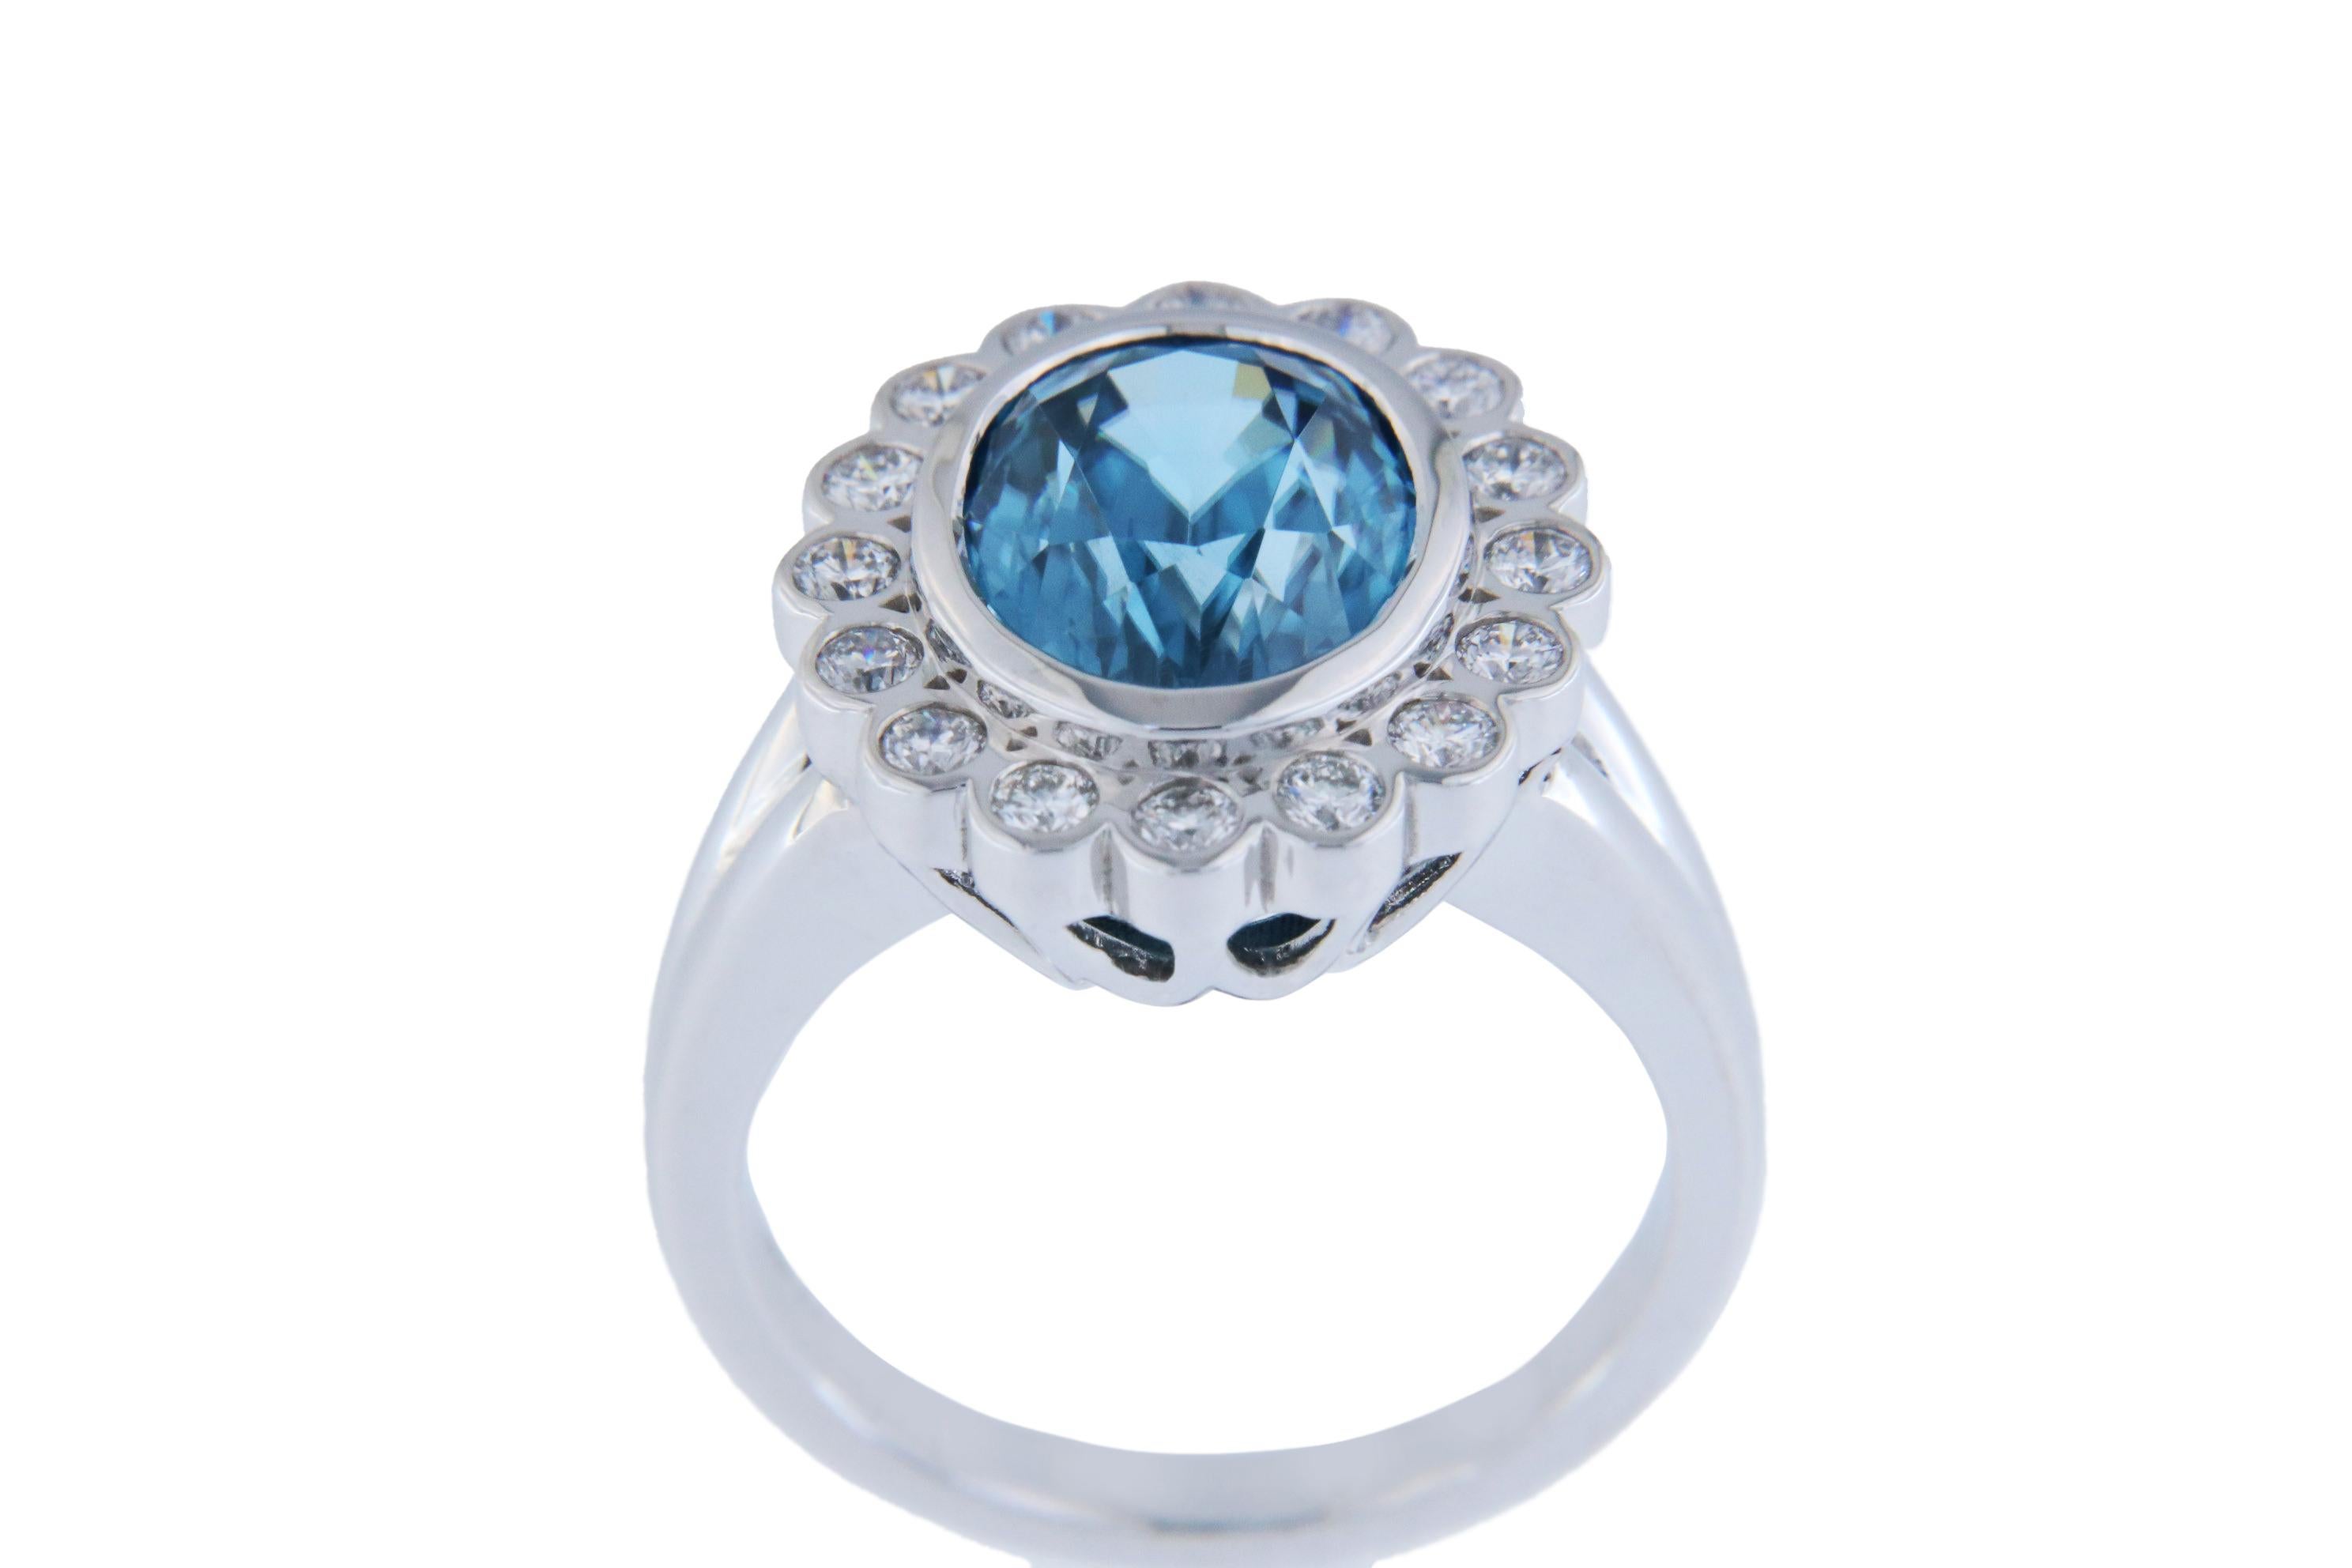 Cushion Cut Orloff of Denmark, 6 ct Natural Blue Zircon Diamond Ring in 925 Sterling Silver For Sale